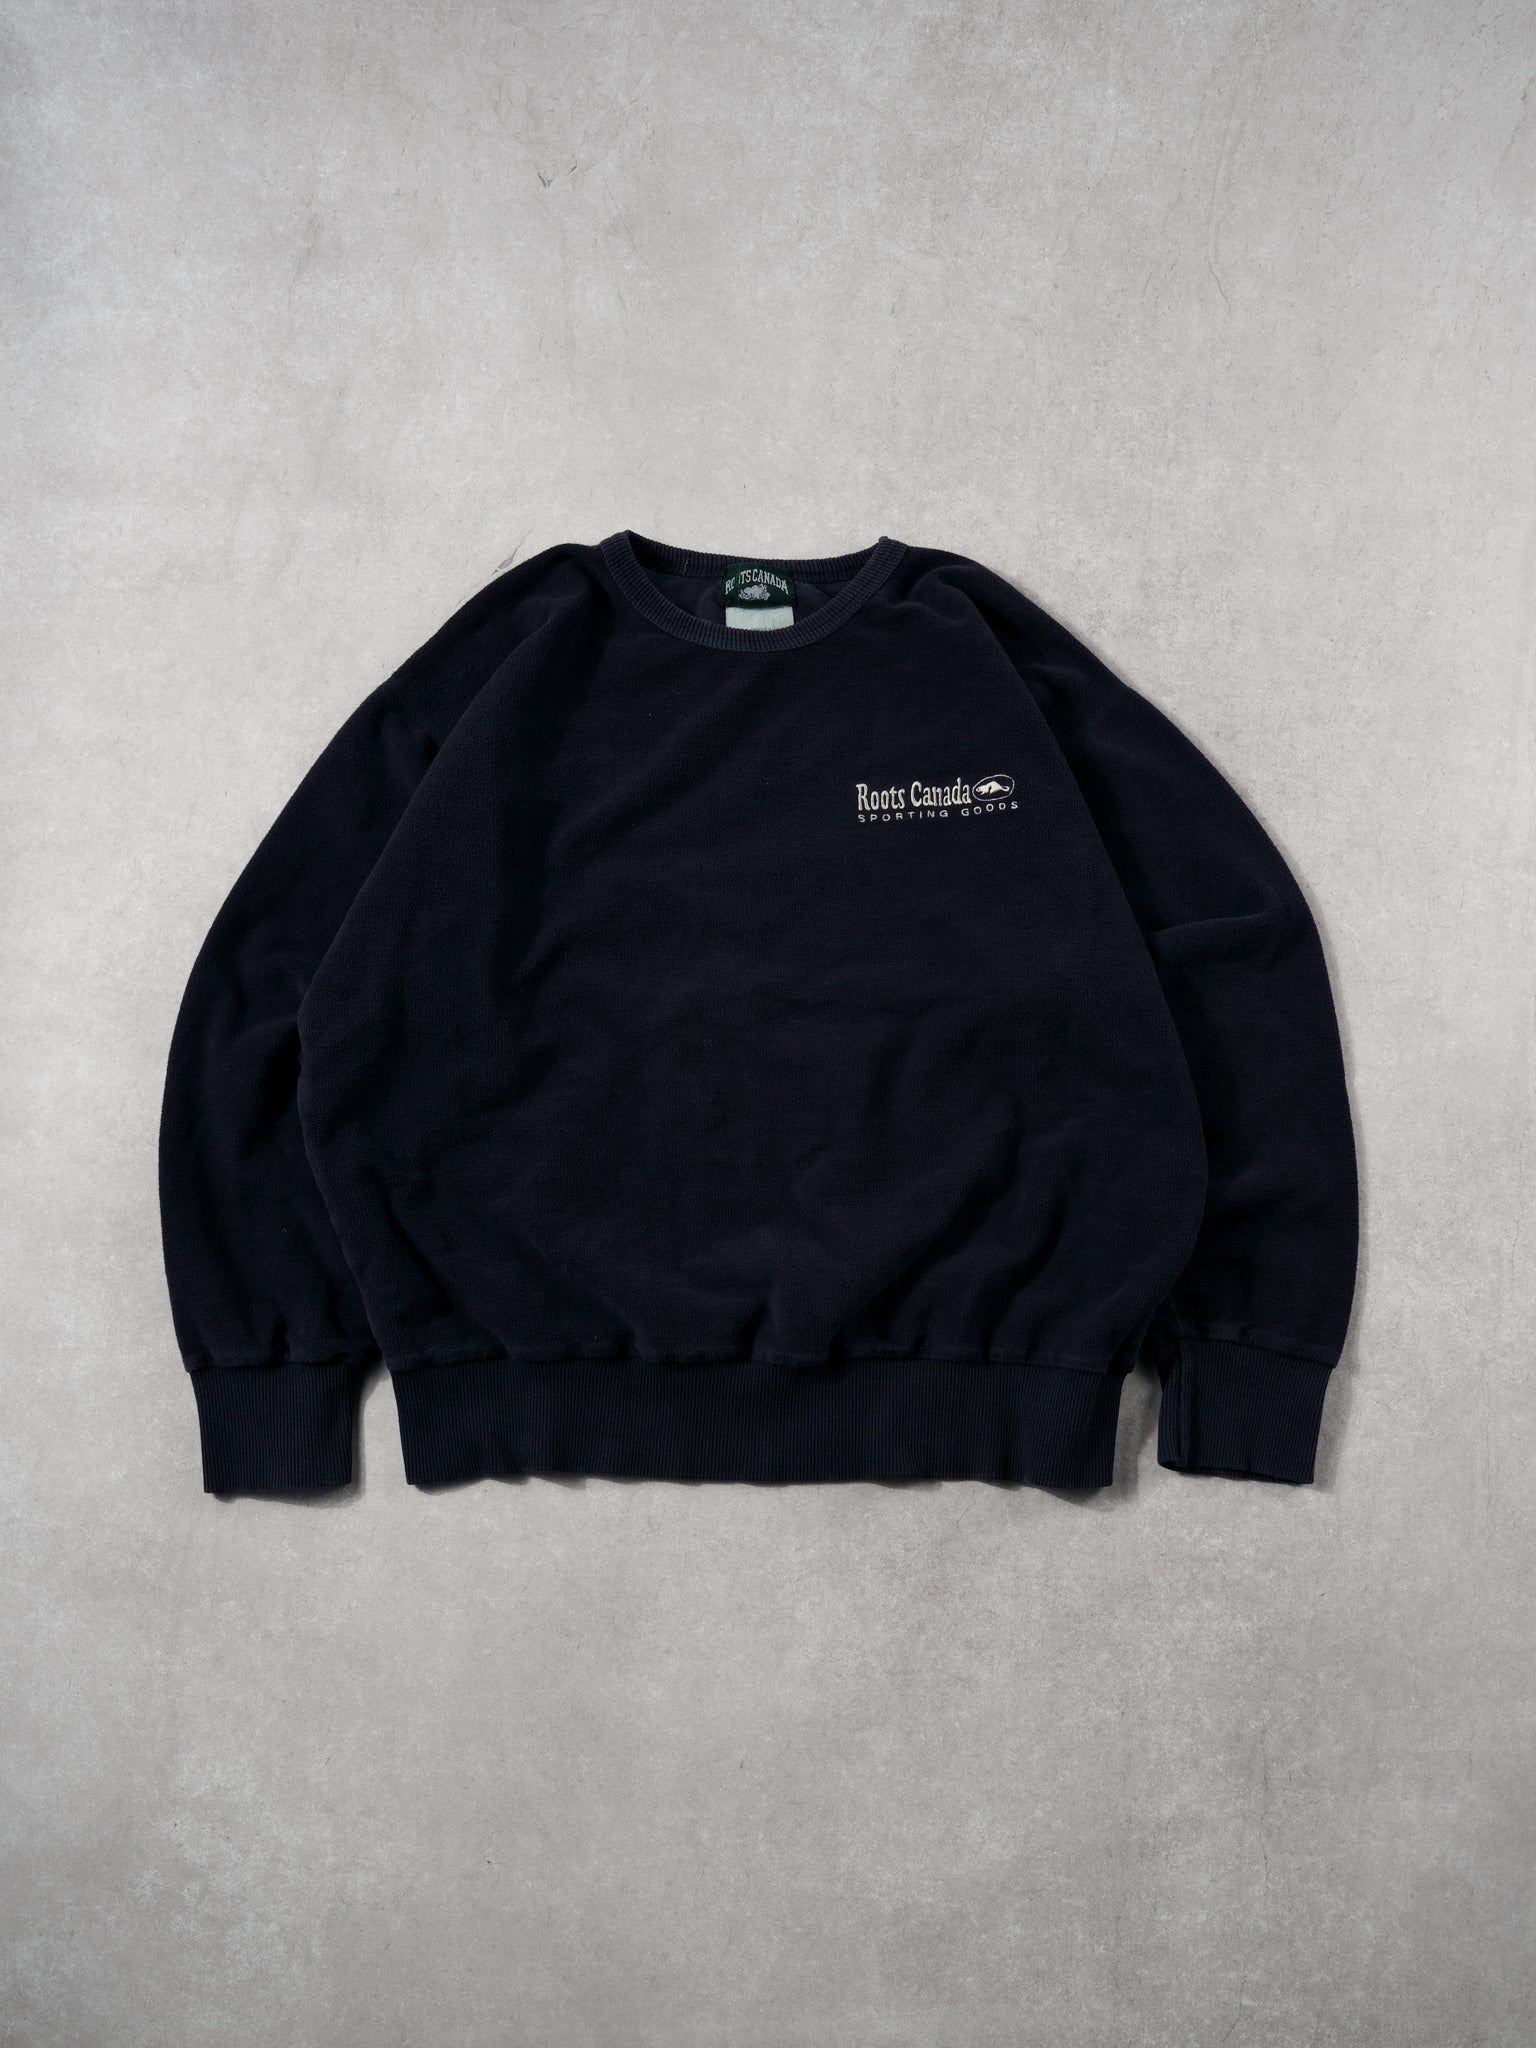 Vintage 80s Navy Blue Roots Canada Sporting Goods Crewneck (L)